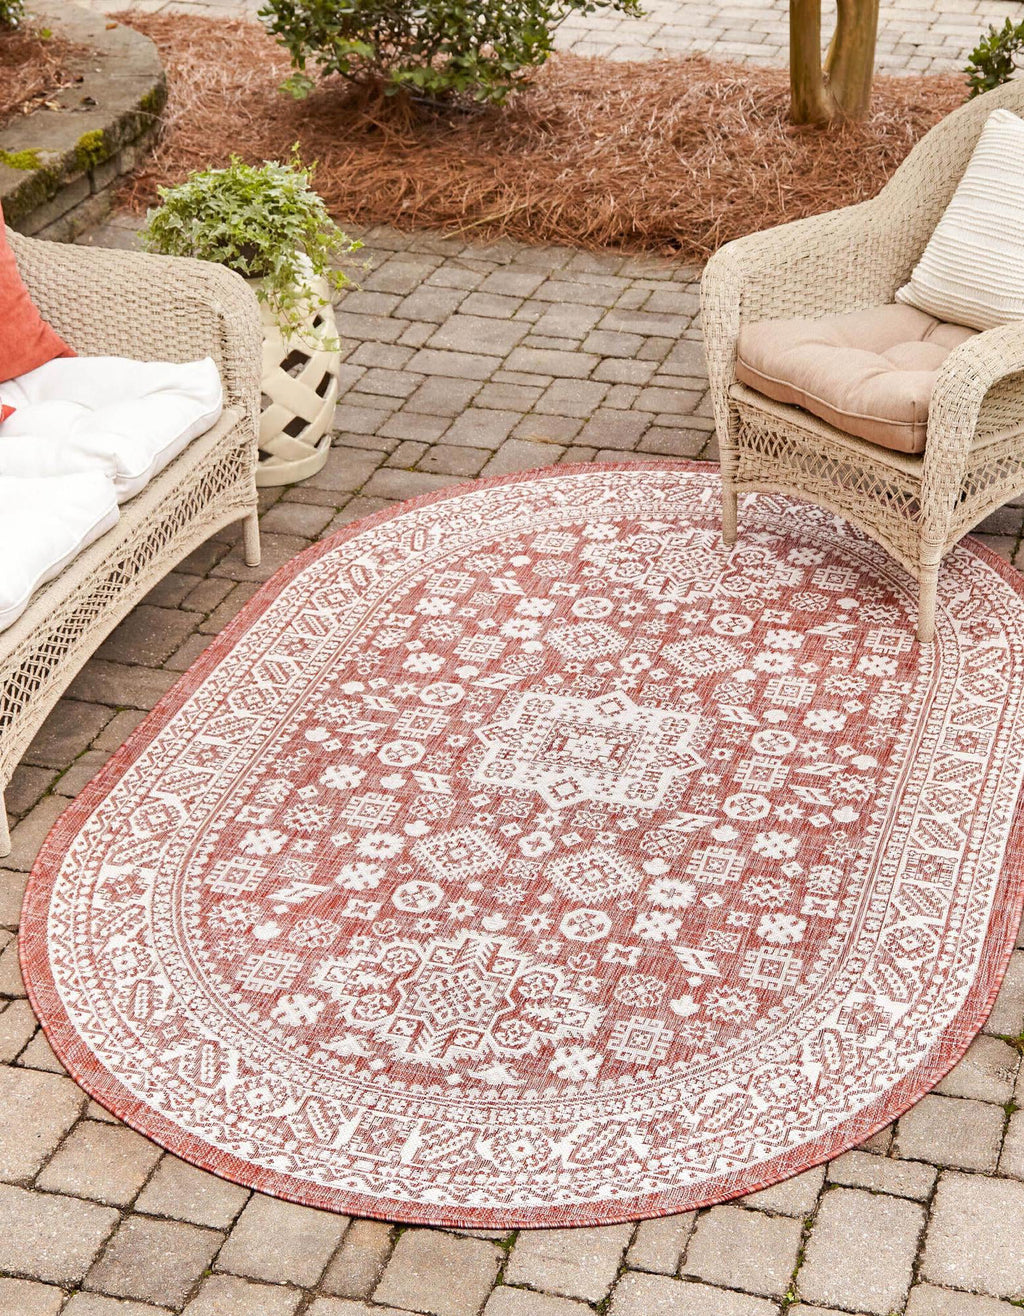 Unique Loom Outdoor Aztec T-KZOD17 Rust Red Area Rug Oval Lifestyle Image Feature